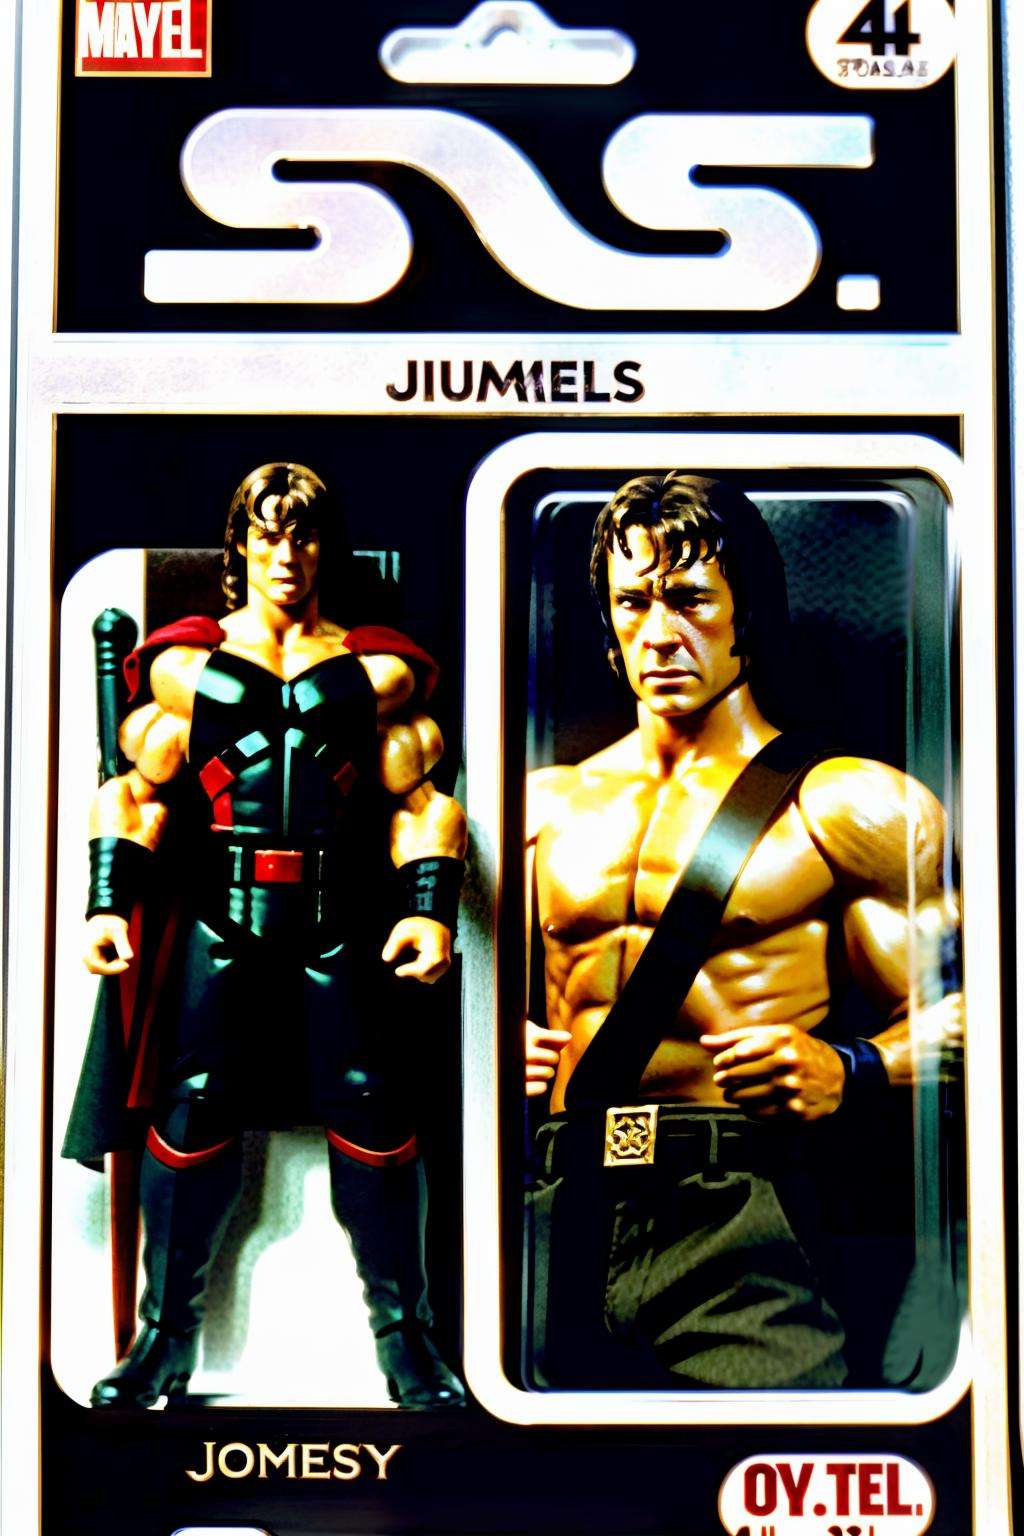 Thor-Bond: A blend of Thor and James Bond, this figure wields godly strength:0.4 and uses spy gadgets:0.4. , awe_toys